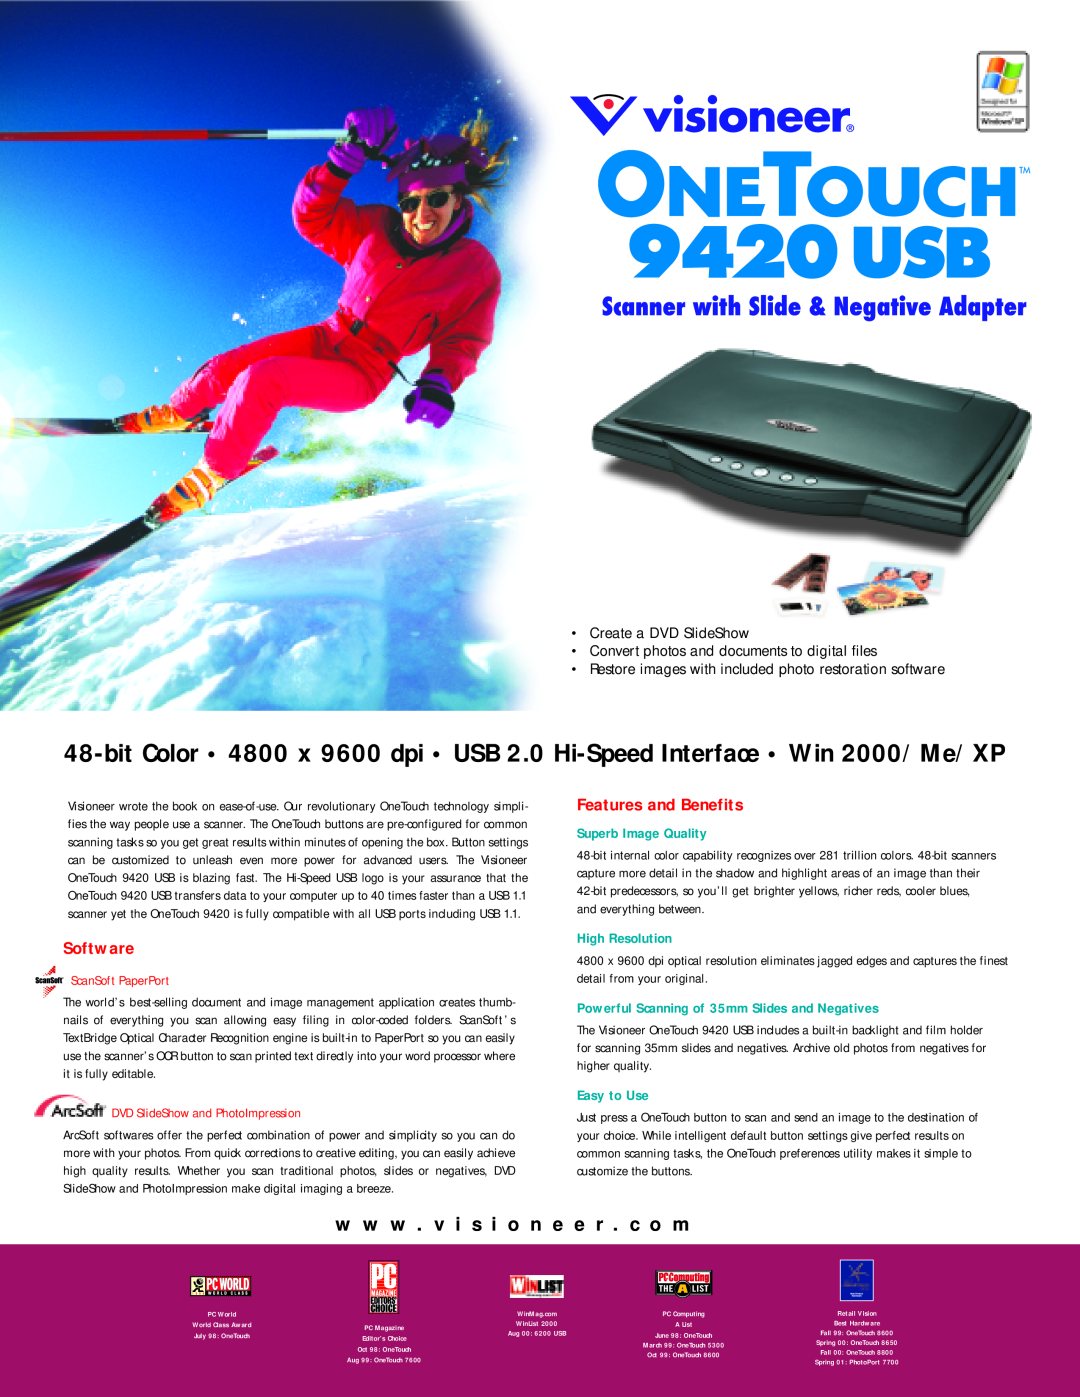 Visioneer 9420 USB manual Software, Features and Benefits, w w w . v i s i o n e e r . c o m, ScanSoft PaperPort 